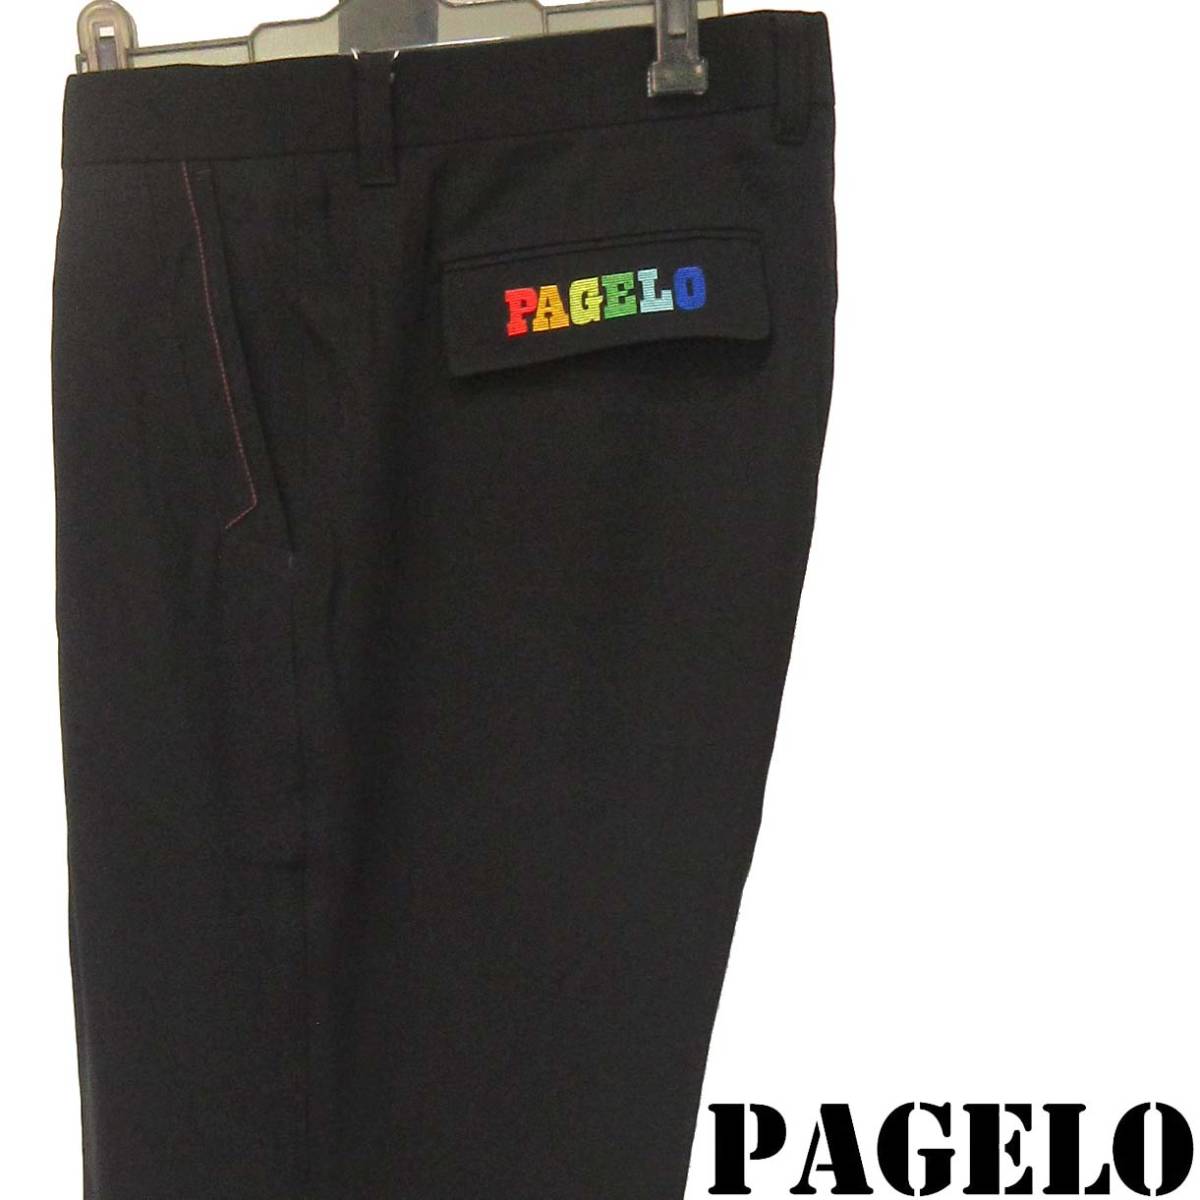 ★PAGELO★SALE タック付きスラックス【黒W105㎝】秋冬モデル P5513107 パジェロ